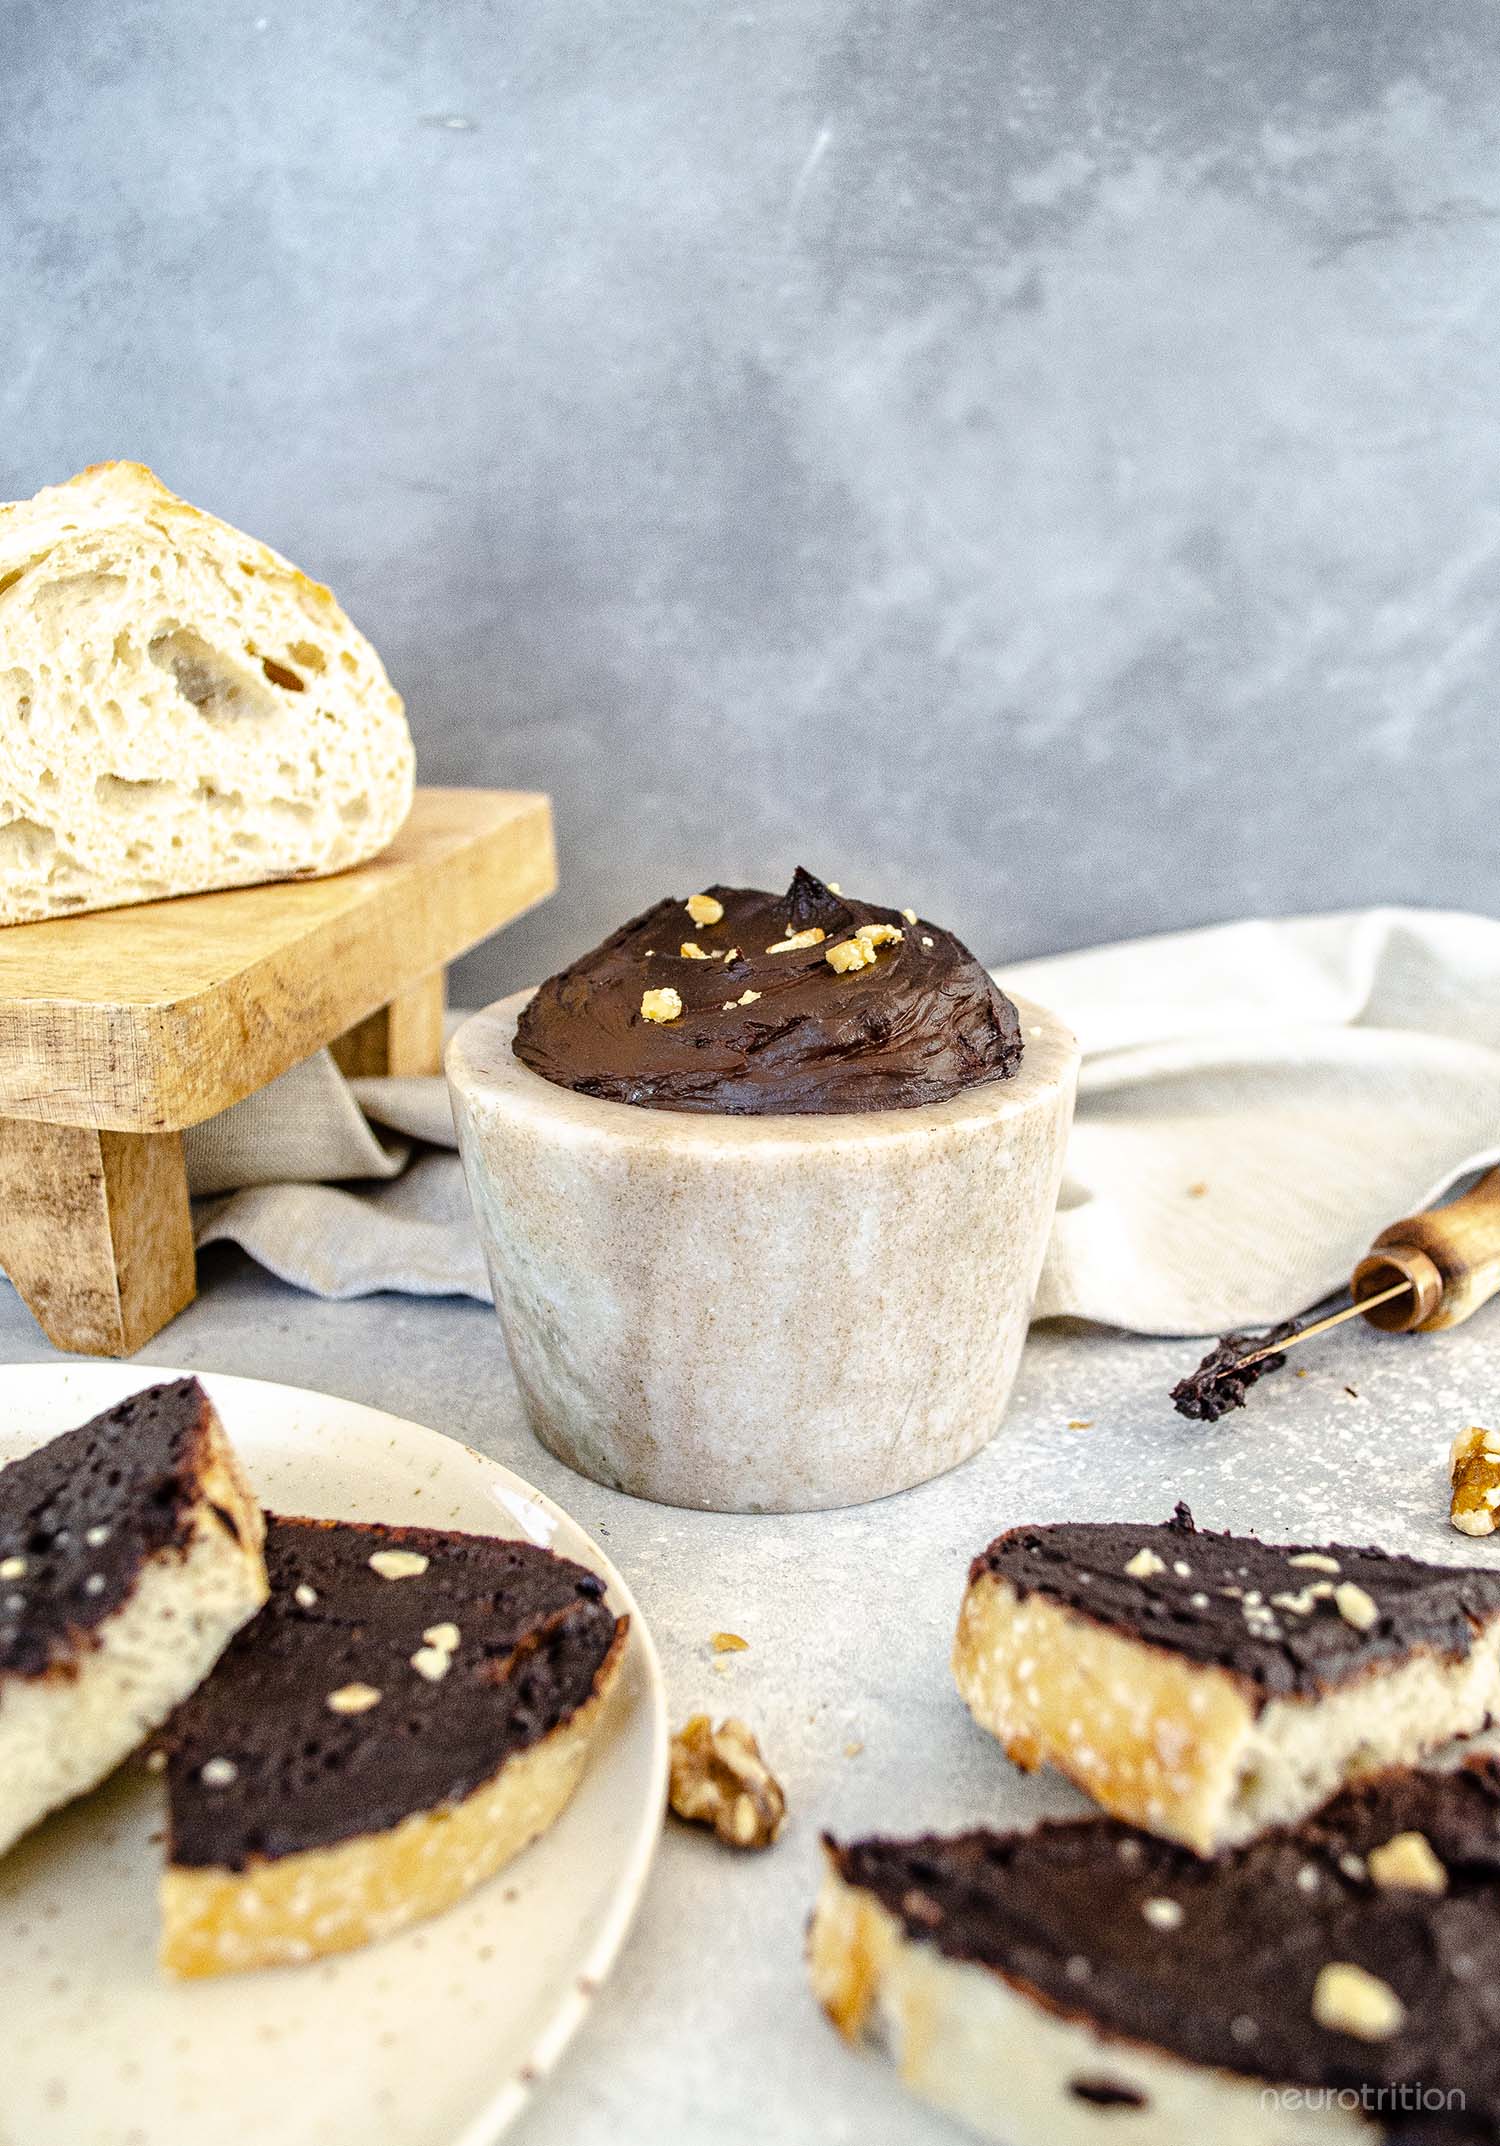 A stone dish full of homemade chocolate spread is surrounded by slices of bread that are covered in the chocolate spread and topped with crushed walnuts.